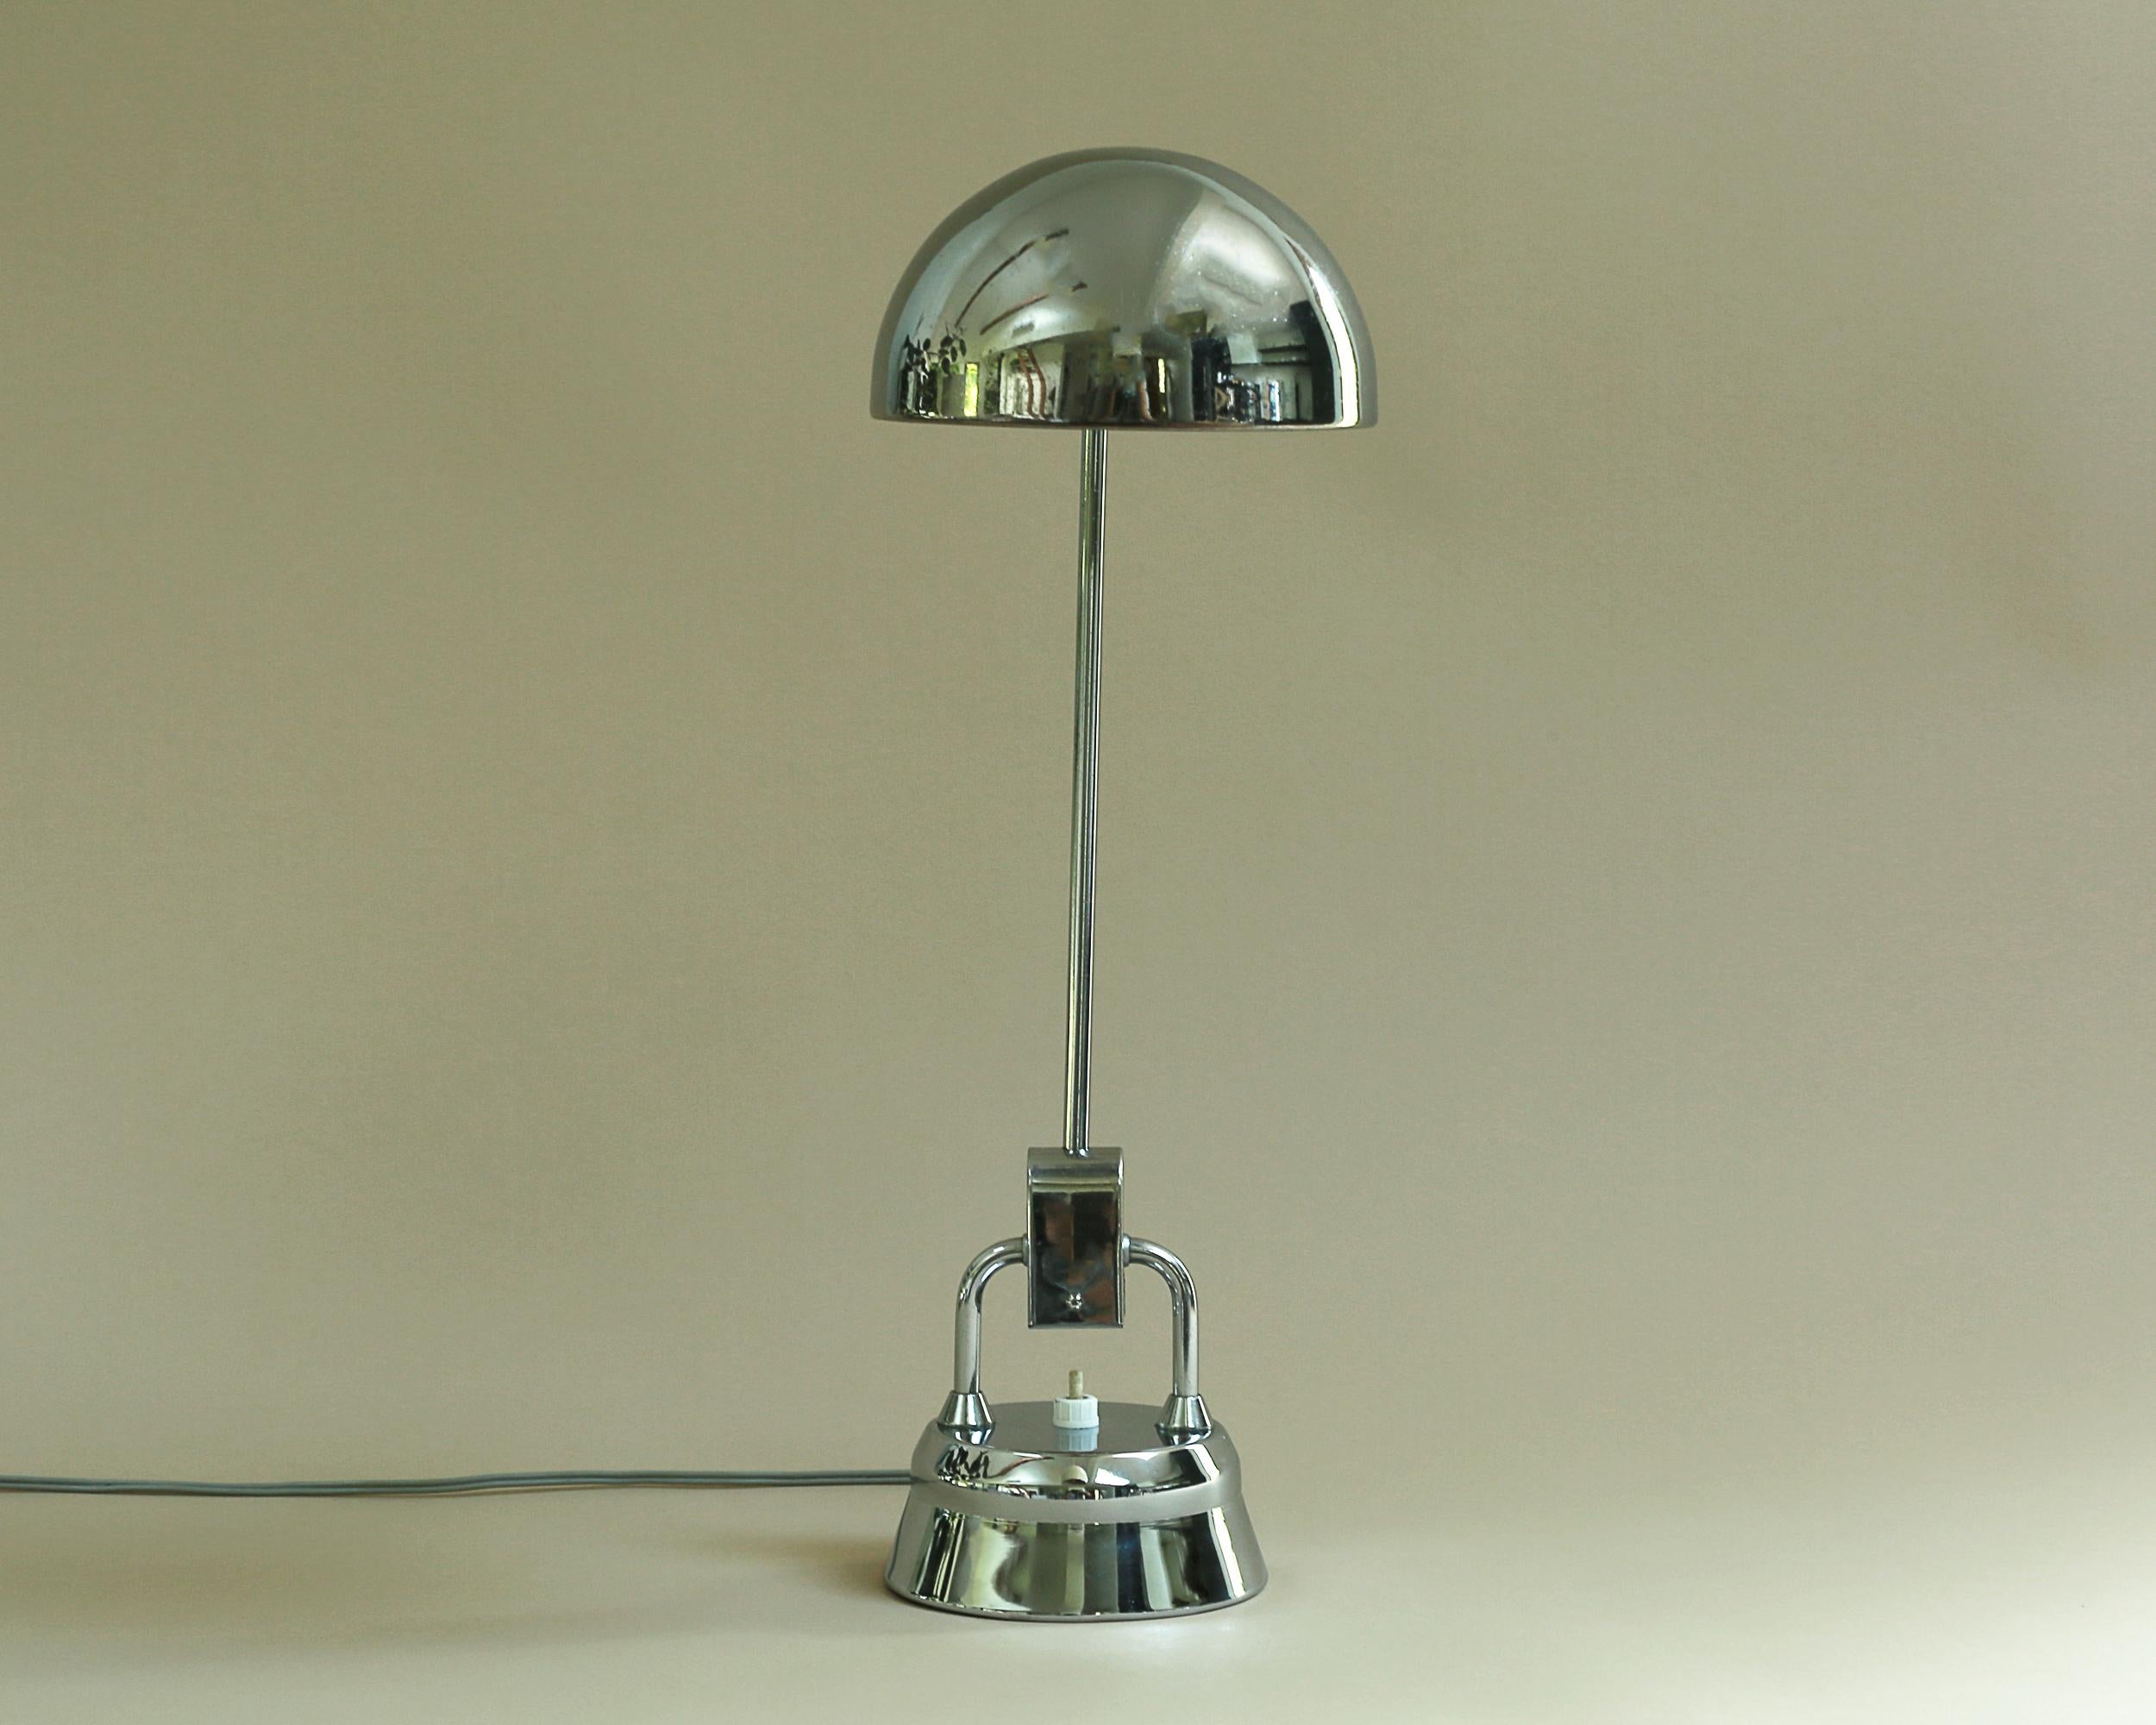 Vintage Jumo 600 Chrome Table Lamp - 1940's - 1950's Mid Century Modern In Good Condition For Sale In New York City, NY